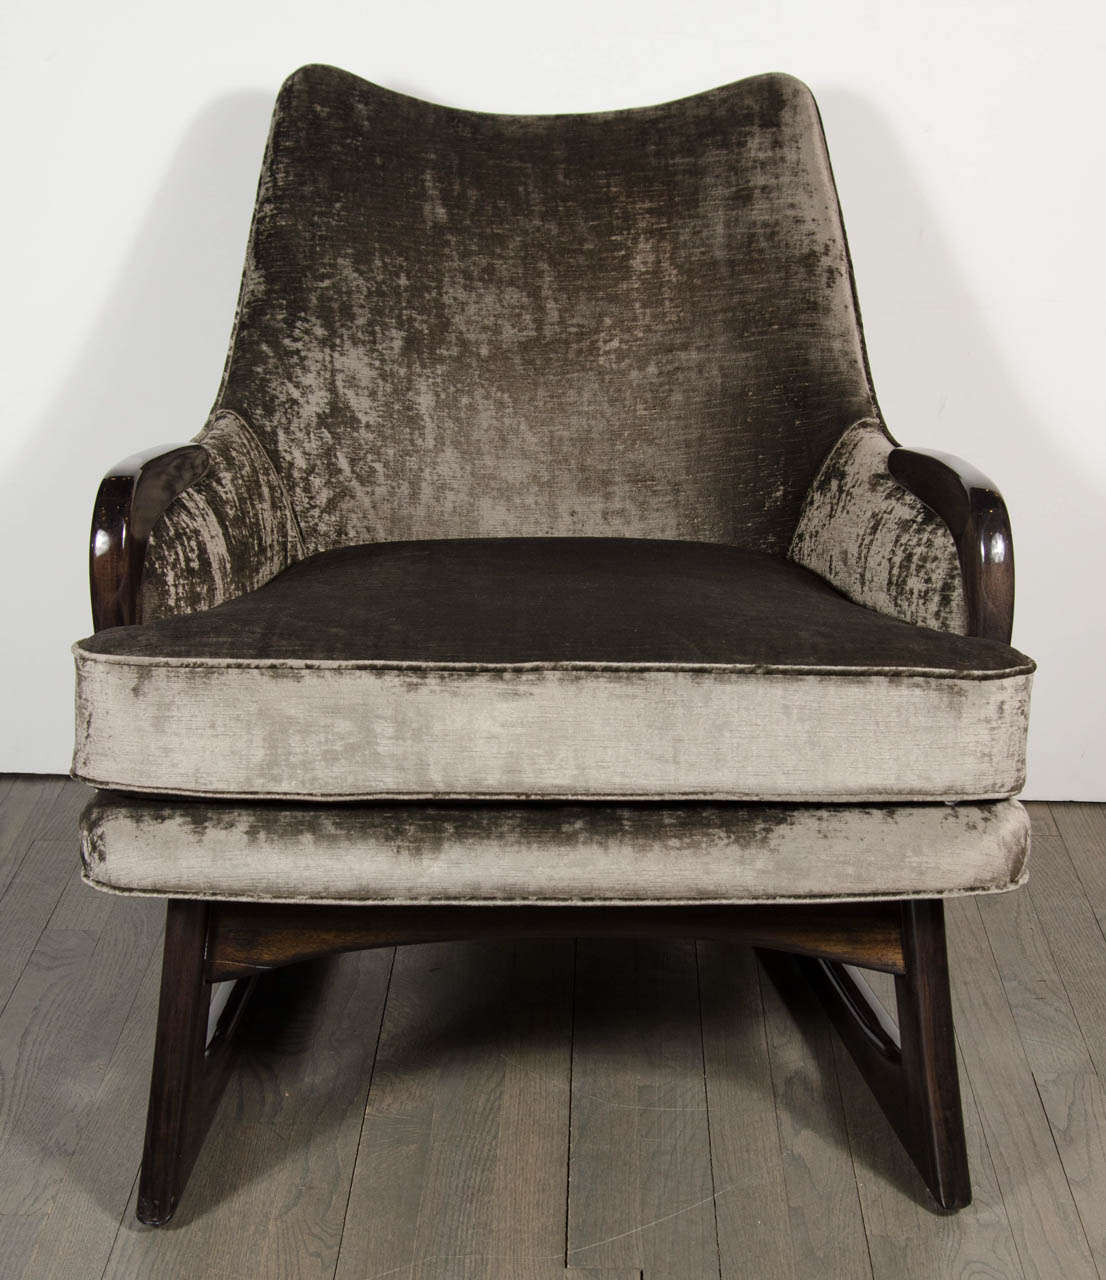 This very sophisticated sleigh form design Mid-Century armchair features ebonized walnut detailing and smoked pewter velvet upholstery. It has been mint restored and newly reupholstered.

Dimensions: 31.5